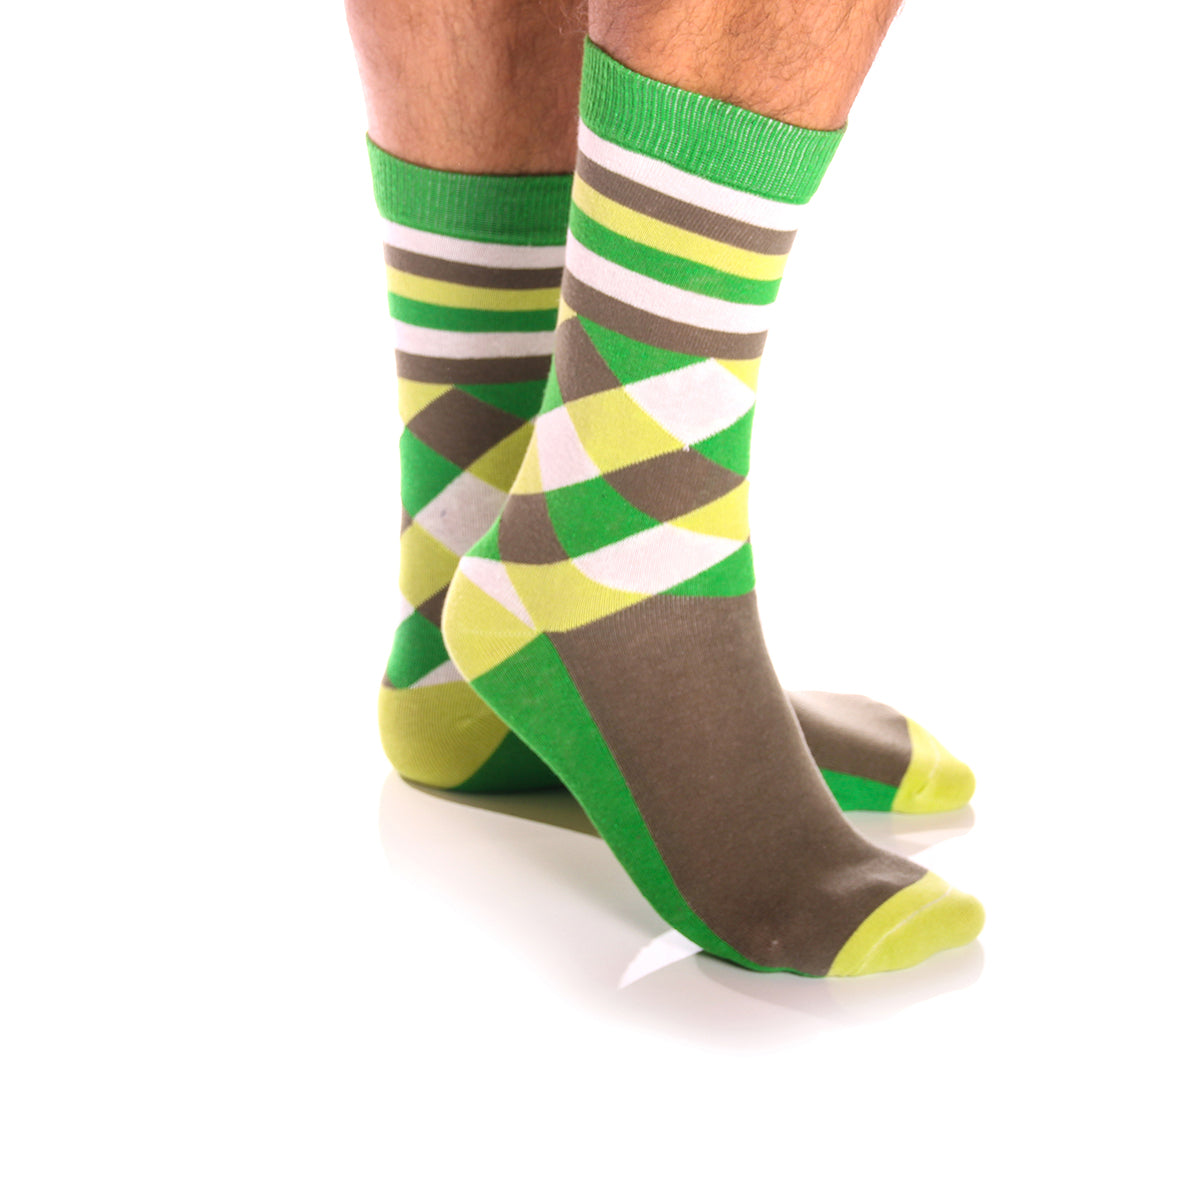 Men's Colorful Green Grey & White Socks - Amedeo Exclusive